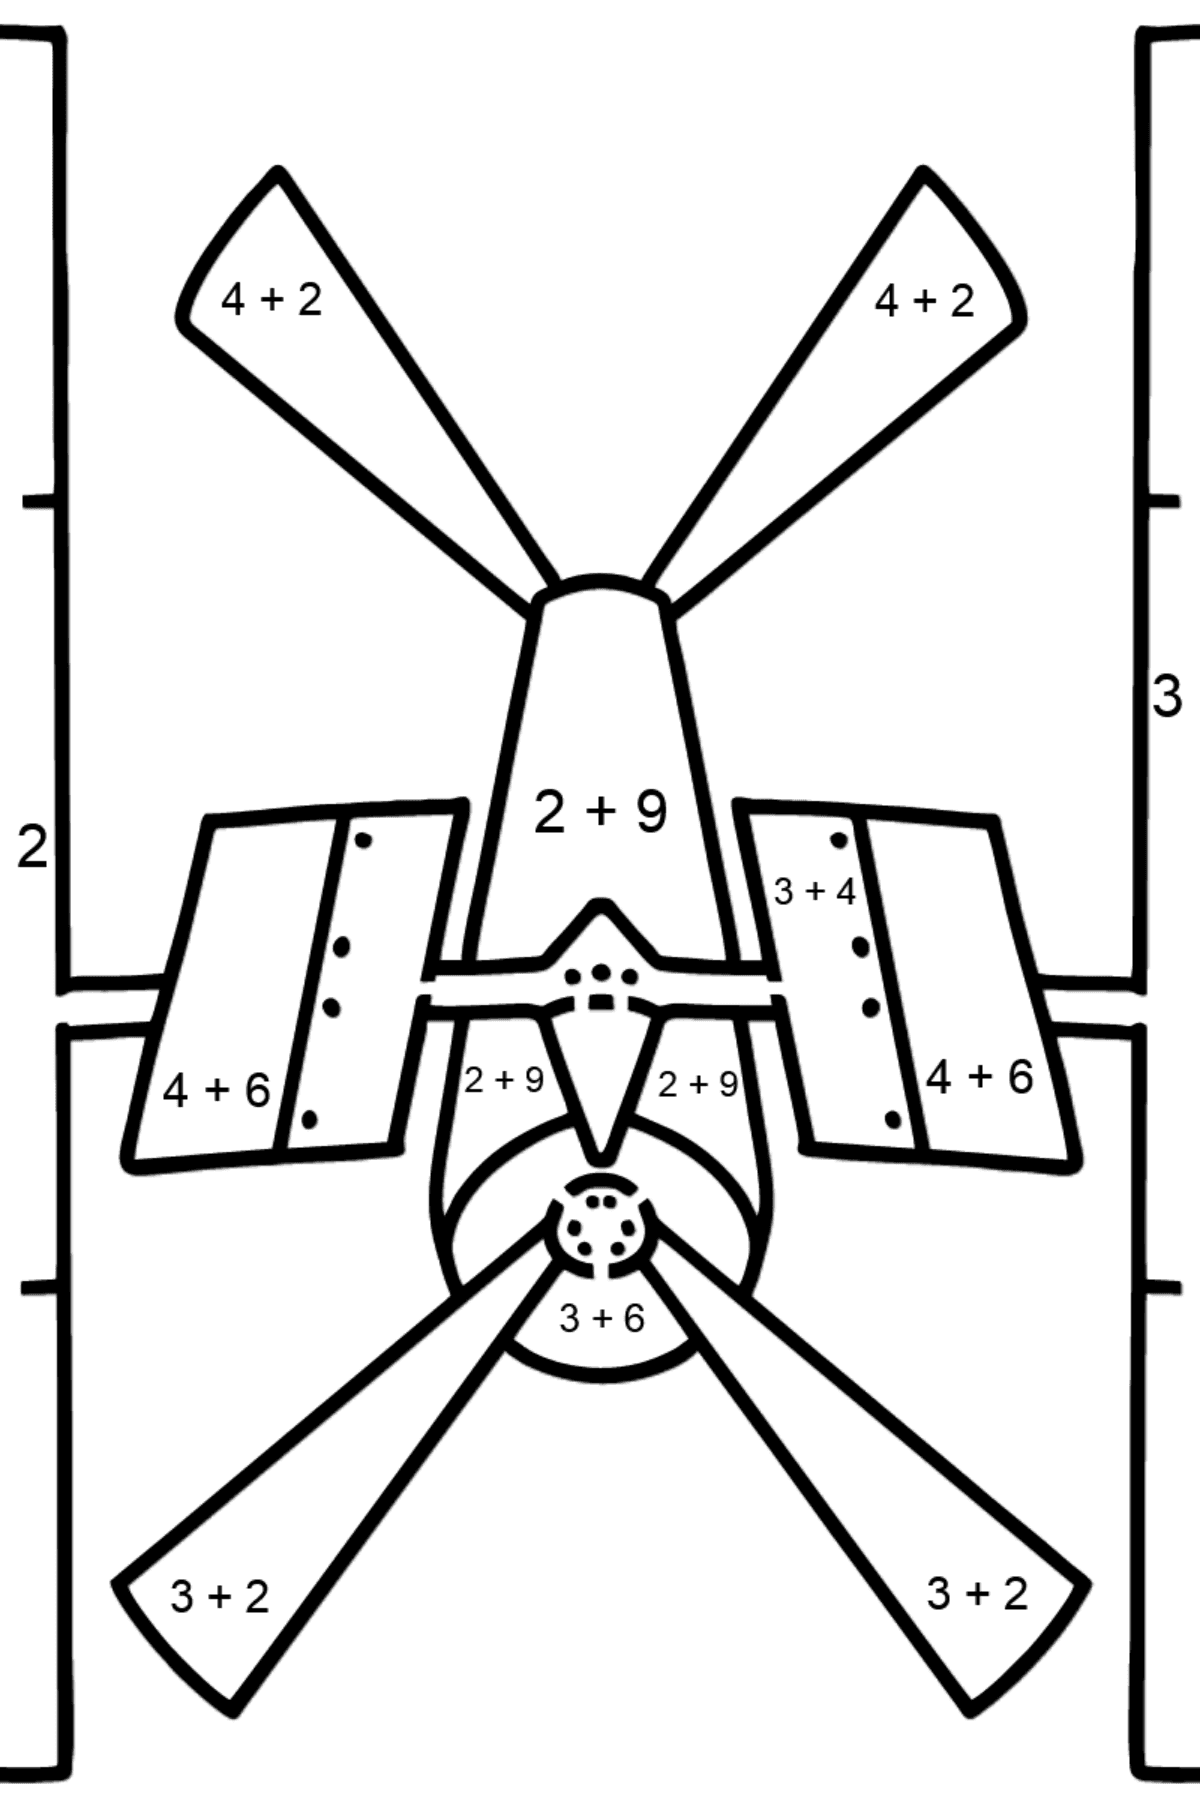 Space Station coloring page - Math Coloring - Addition for Kids